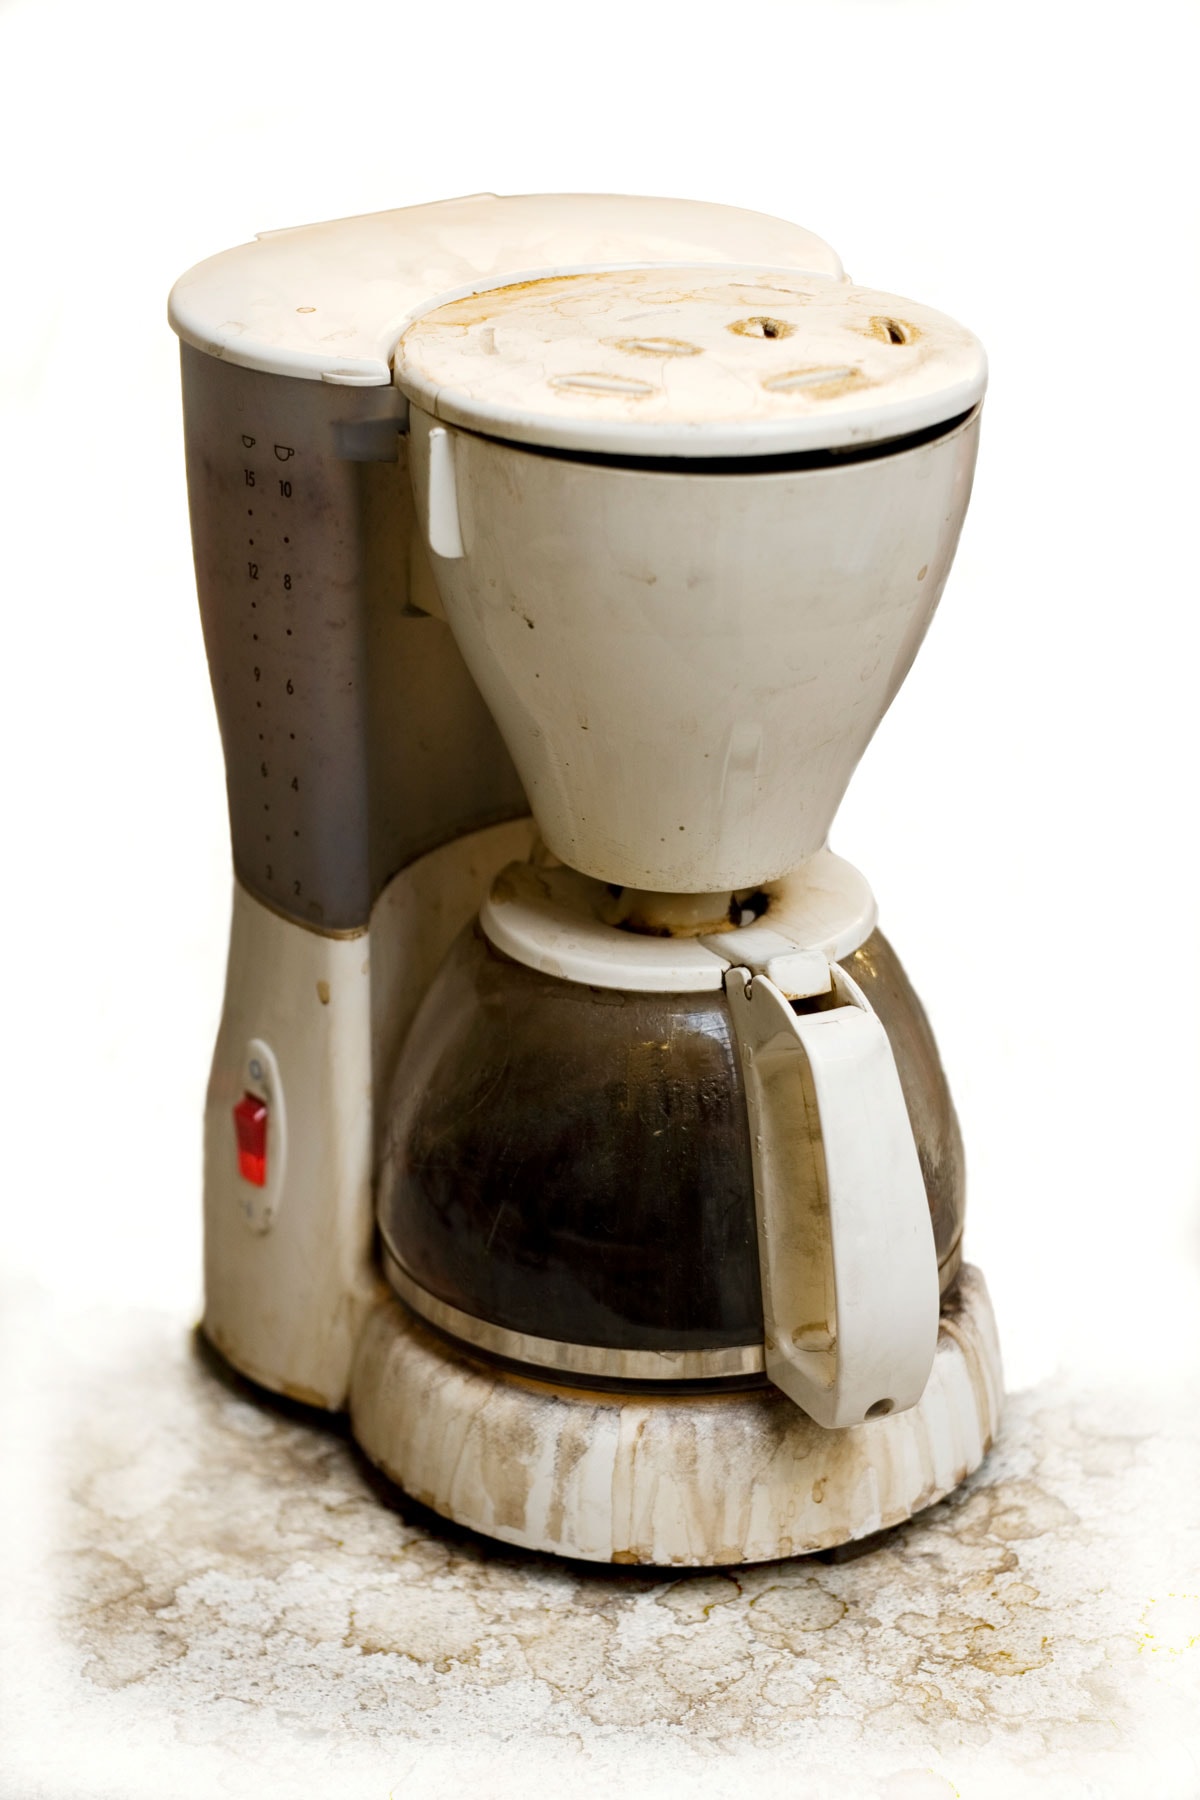 A very used and dirty coffee machine